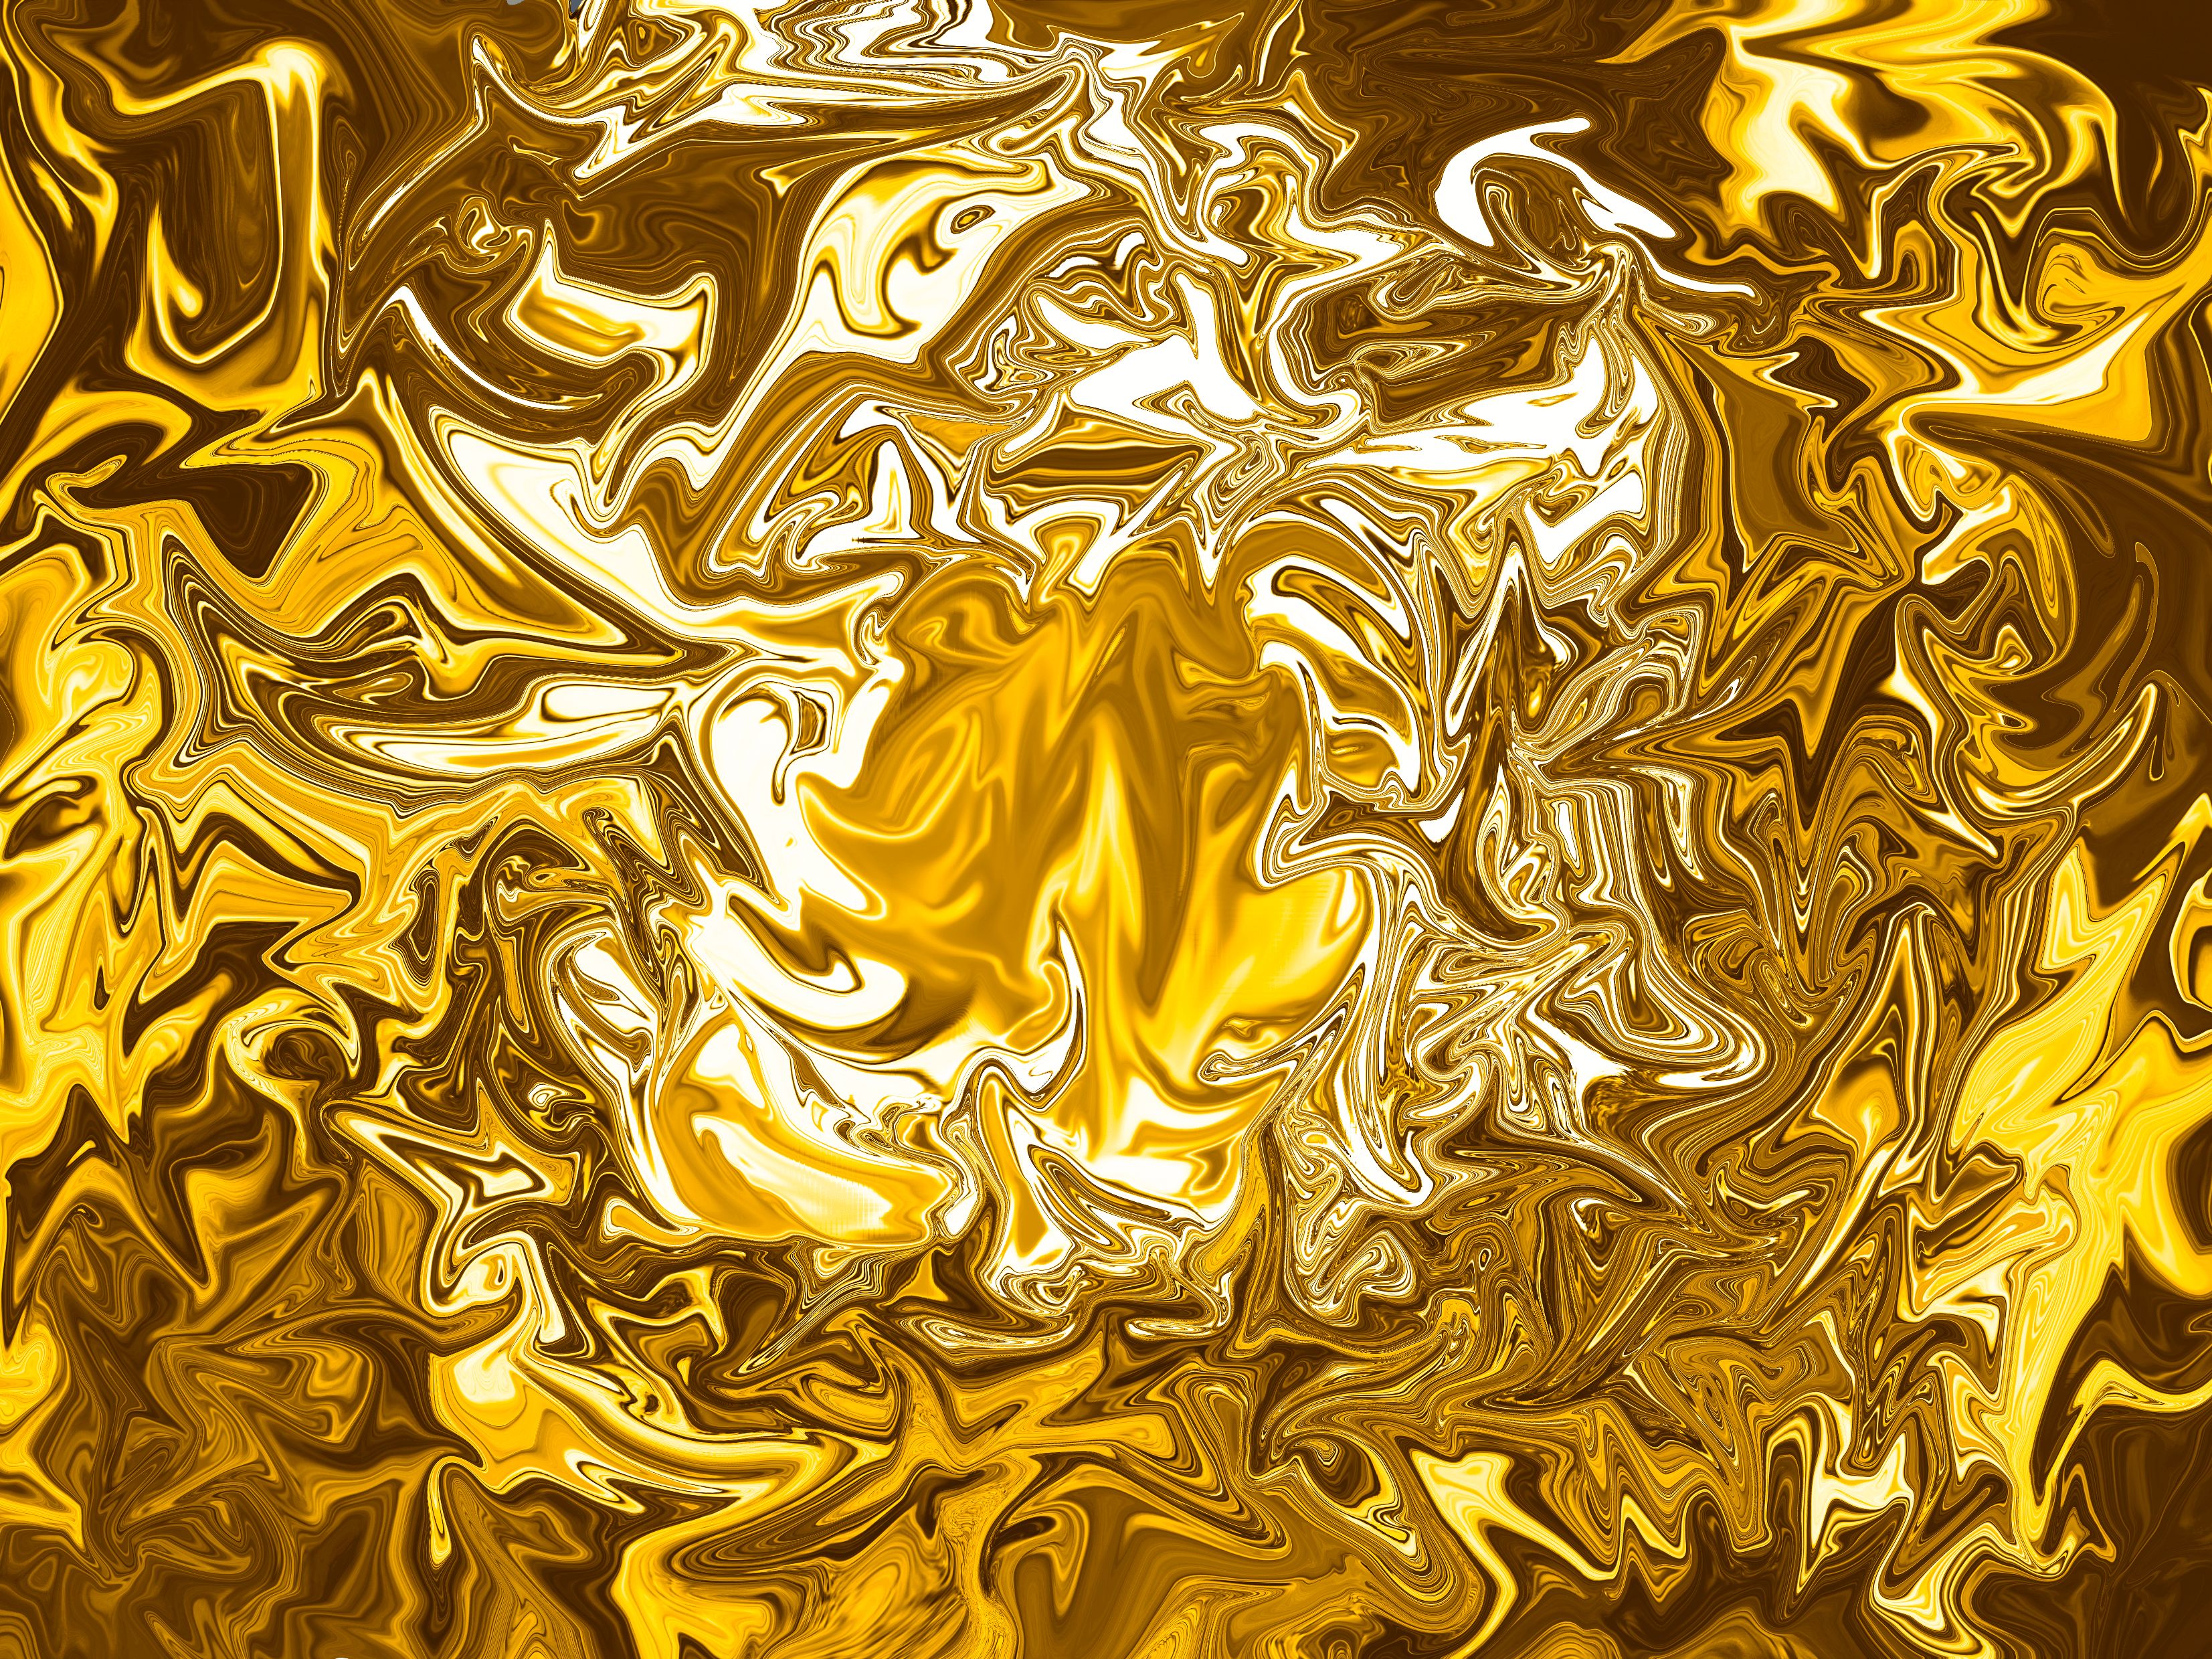 gold, golden, abstract, ripples, ripple, surface, wavy 1080p